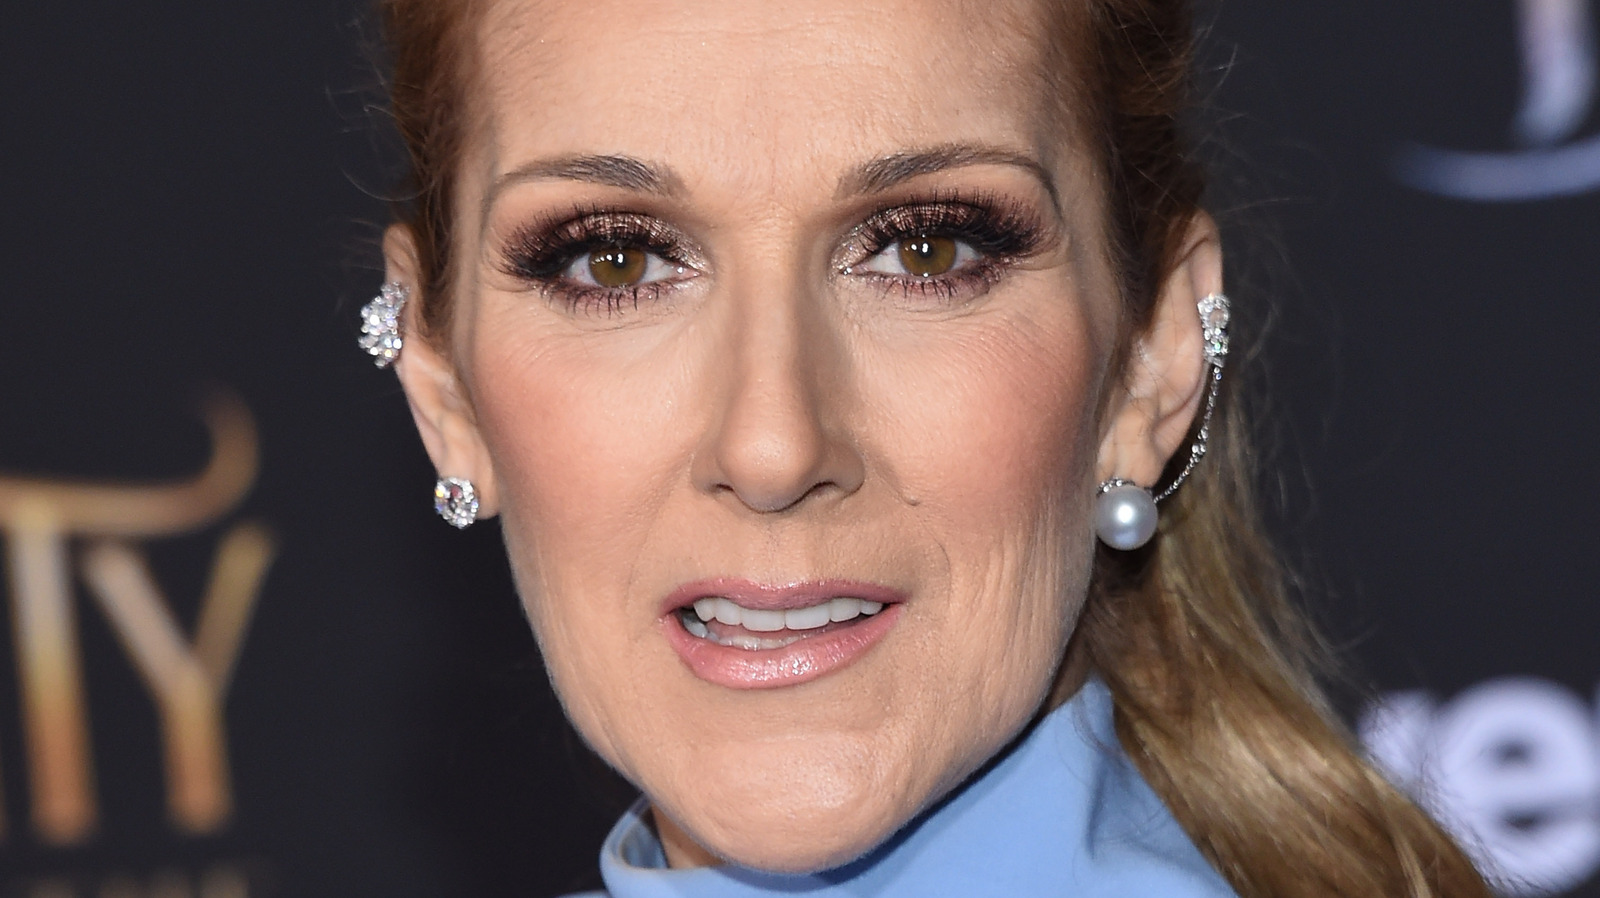 is there dig audible The Truth About Celine Dion's Weight Loss